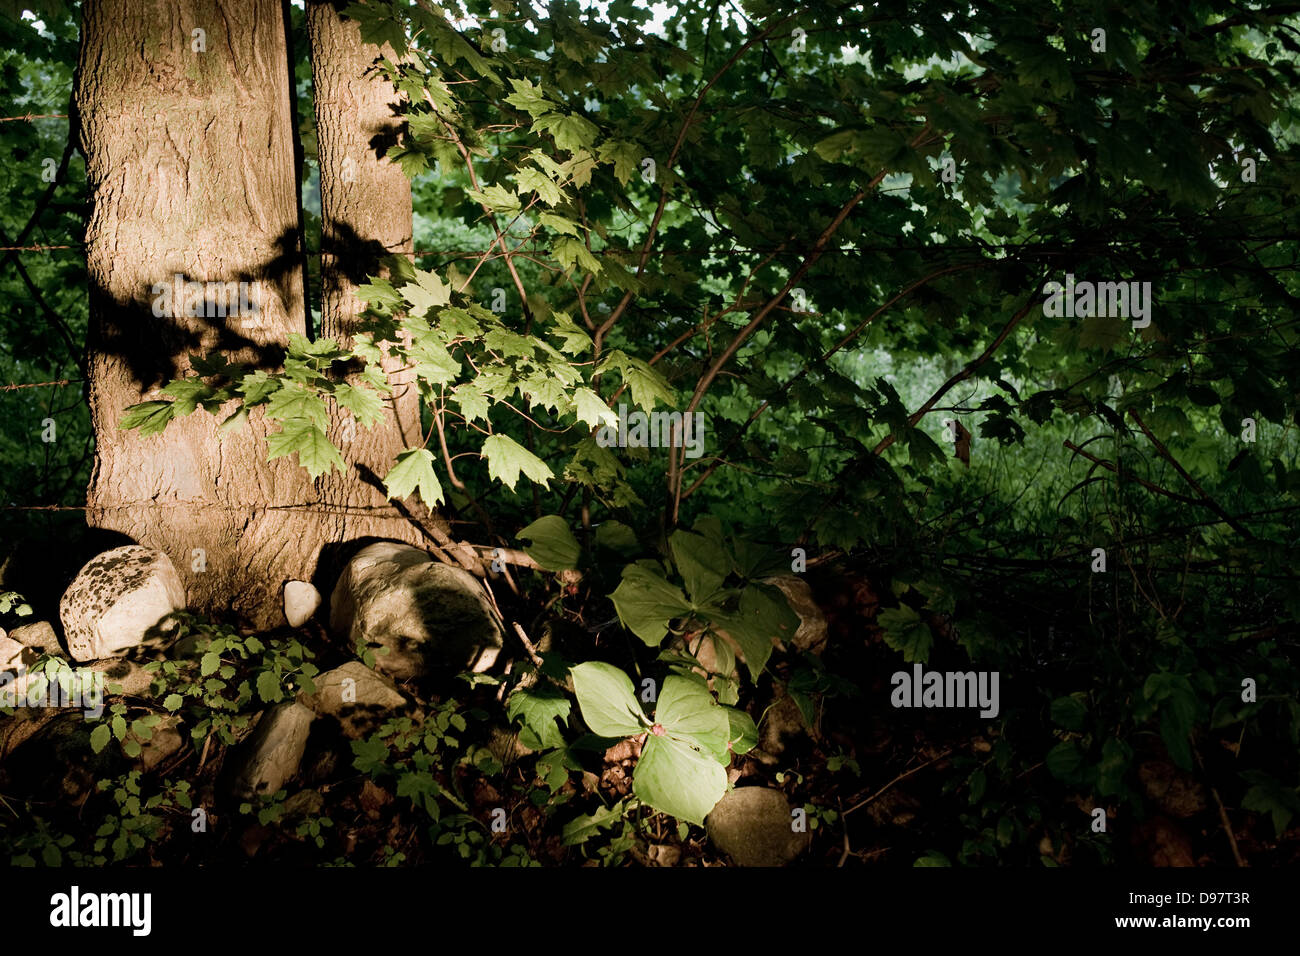 Woodsy fence line along the roadside with vegetation lighted with a flashlight. Stock Photo